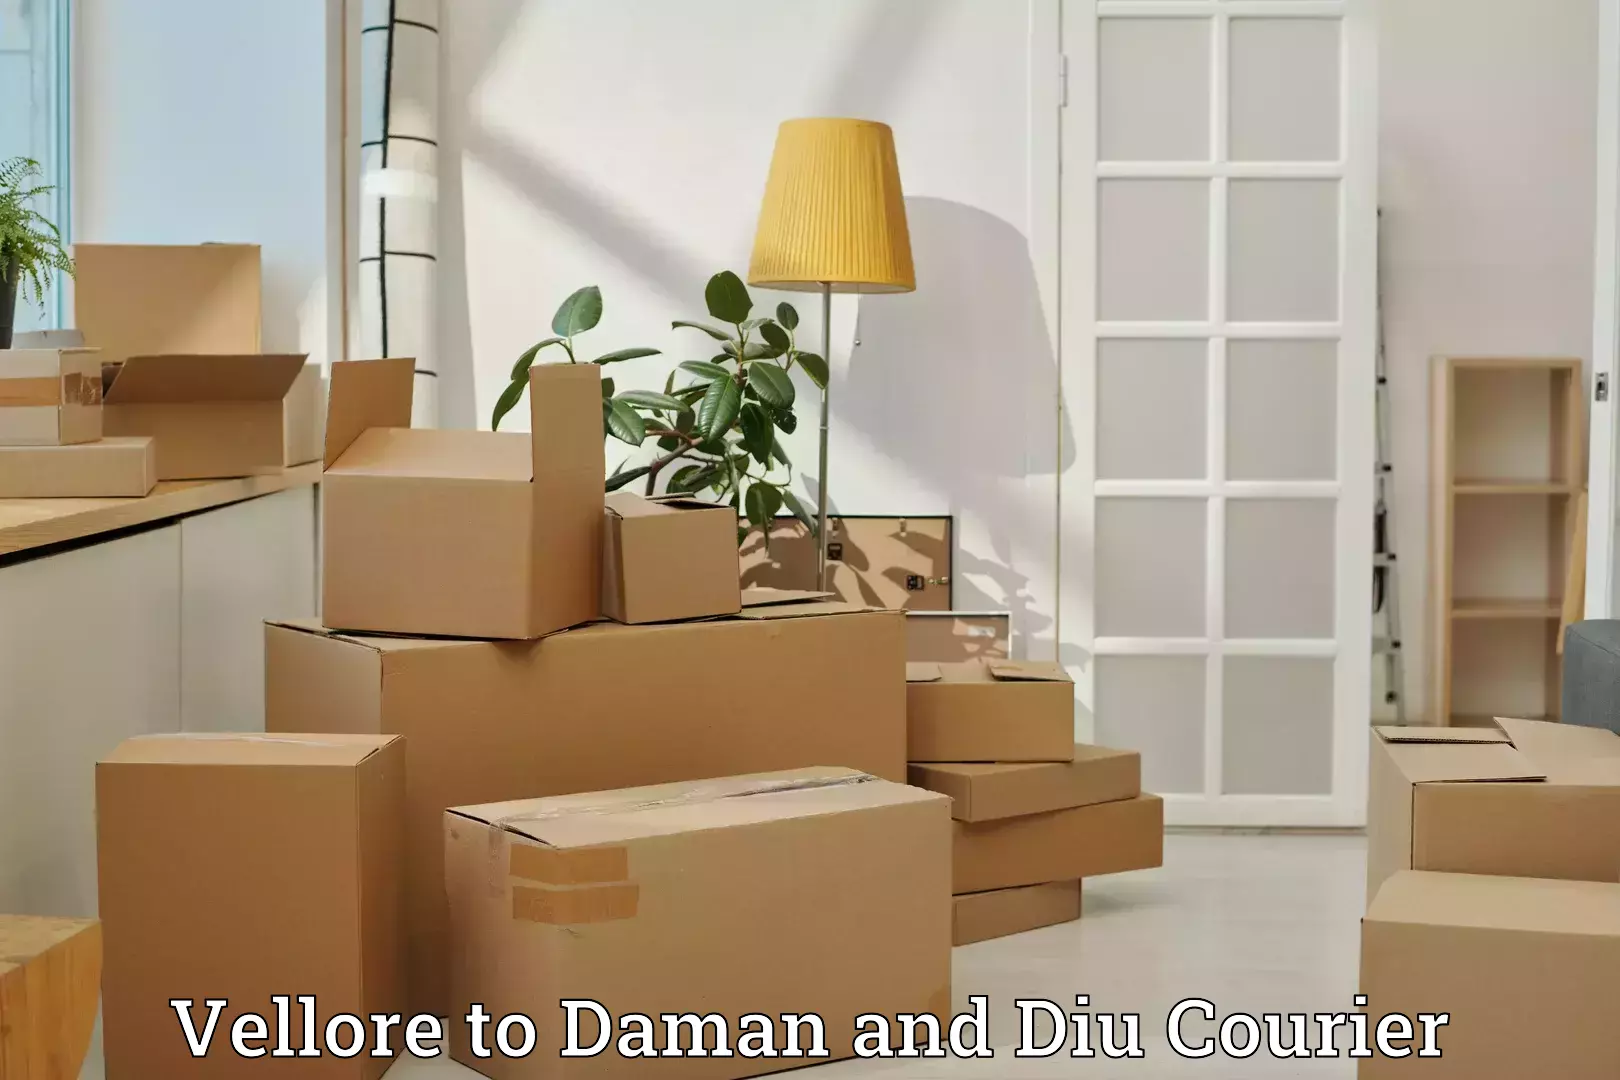 Luggage transport deals Vellore to Daman and Diu